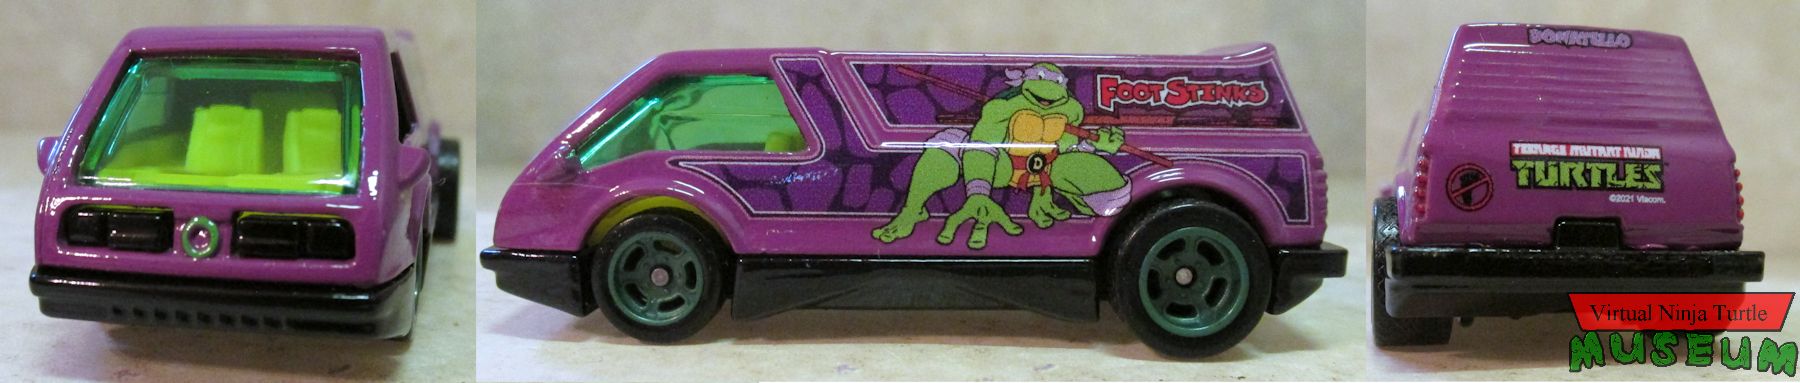 Donatello: Dream Van XGW front, side and back